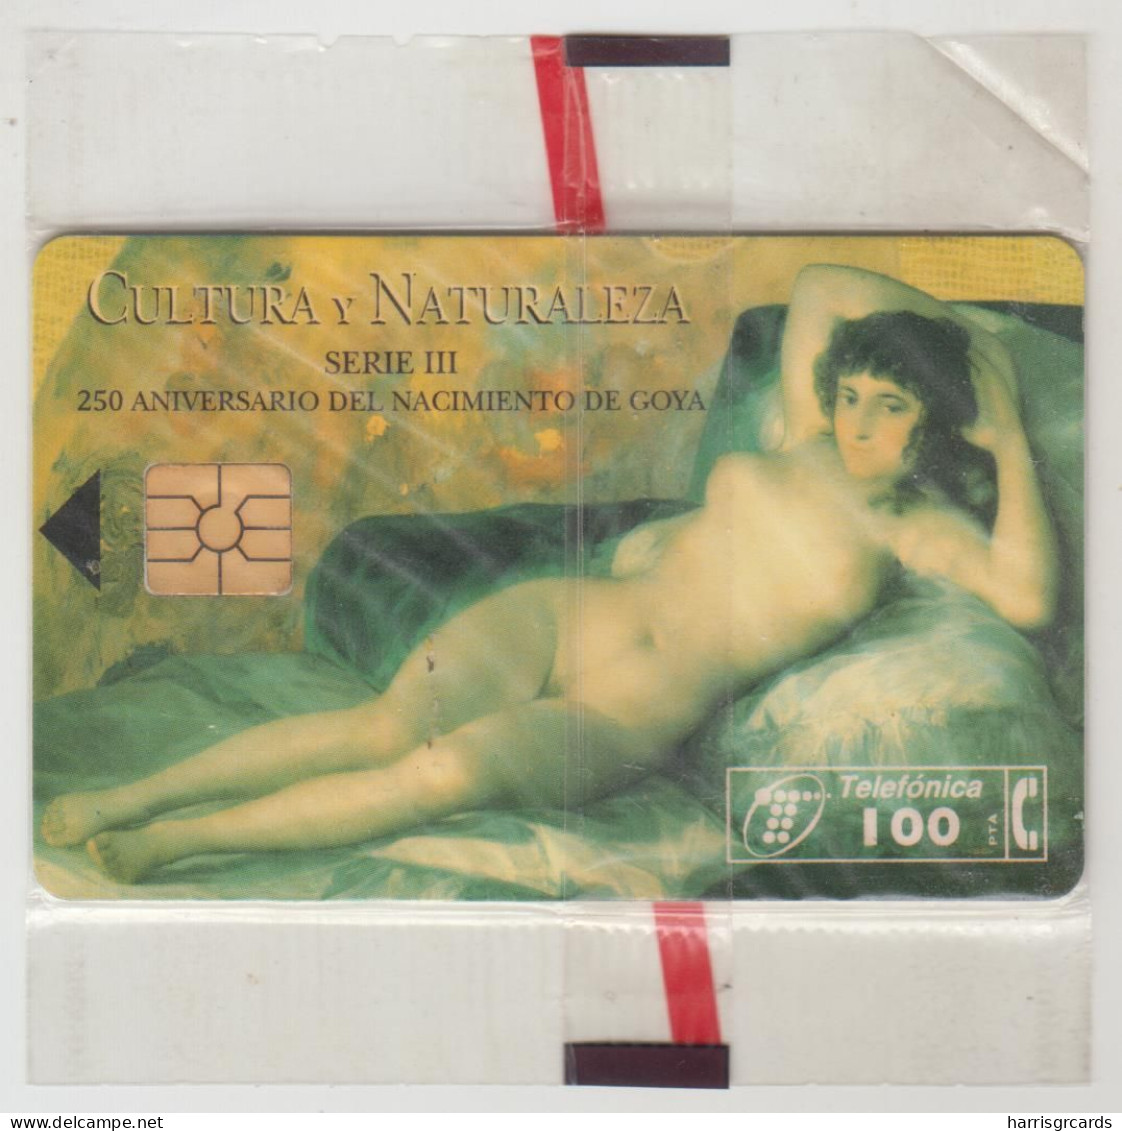 SPAIN - FNMT Cultura Y Naturaleza (Painting Nude Woman), P-200, 05/96, Tirage 9.100, Mint - Private Issues